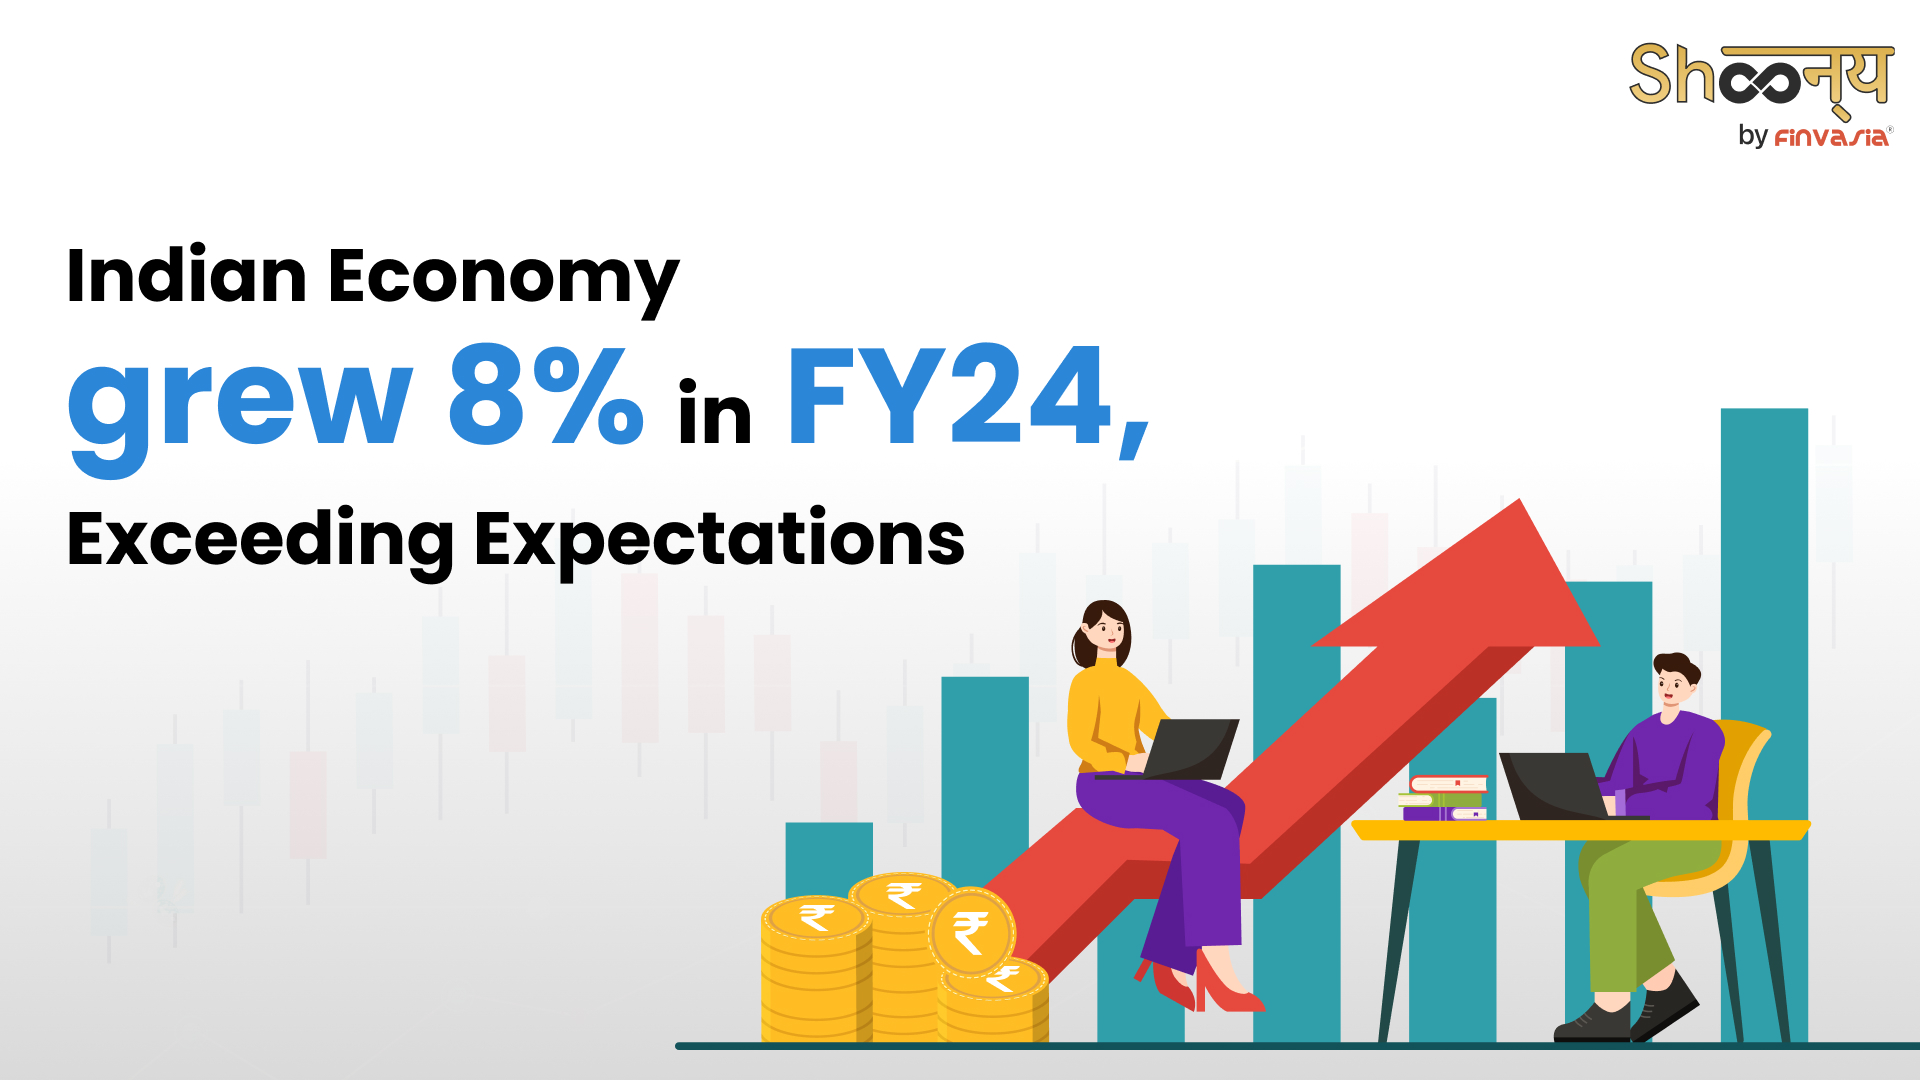 Indian Economy Growth Jumped 8% in FY24 Surpassing the Forecast